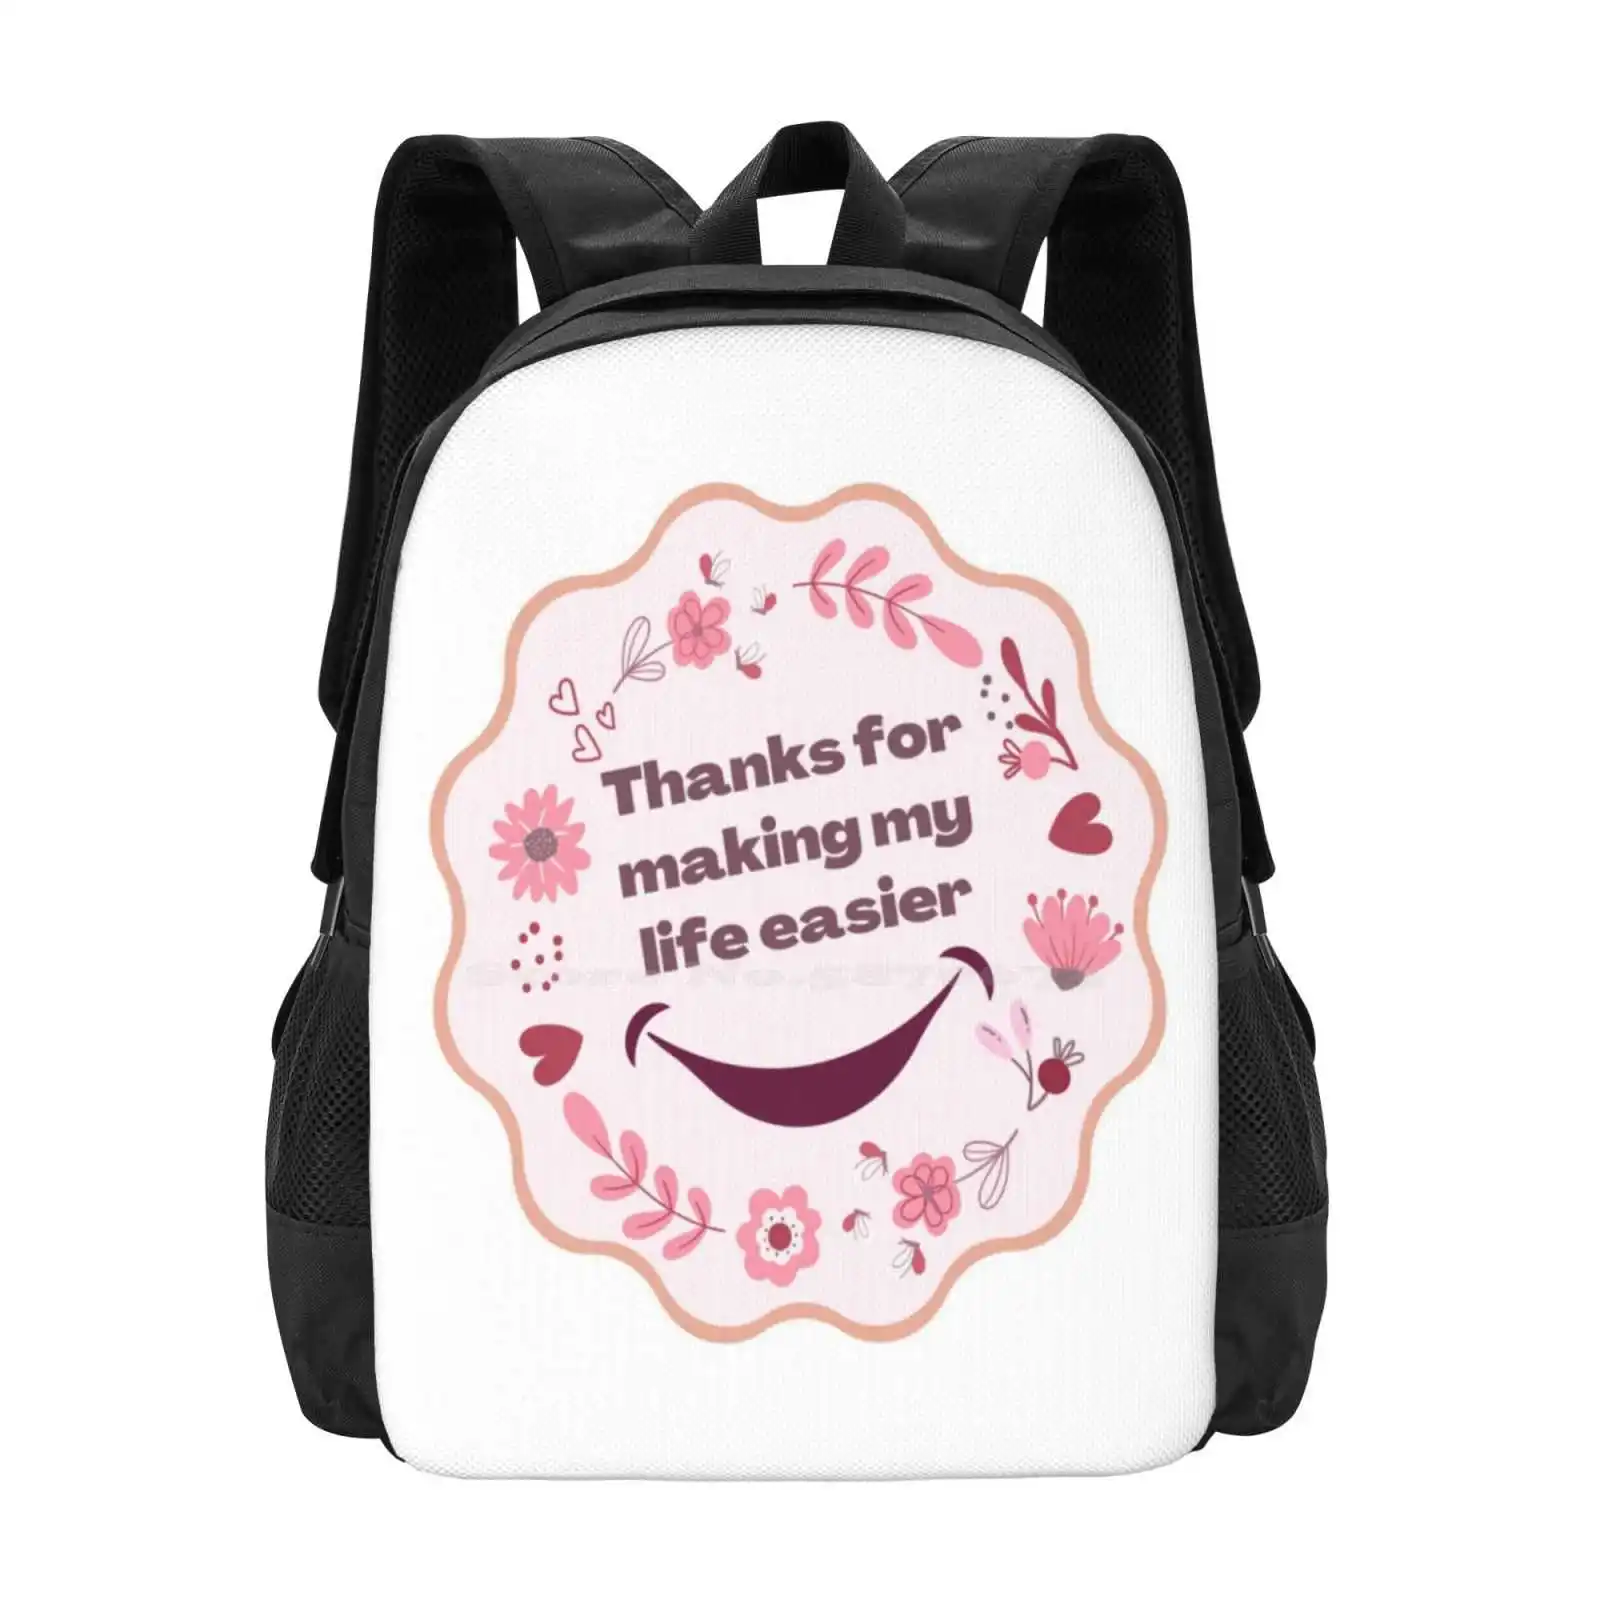 

Thanks For Making My Life Easier , Big Smile Bag Backpack For Men Women Girls Teenage Happy Mothers Day Grandma Mom My Life My